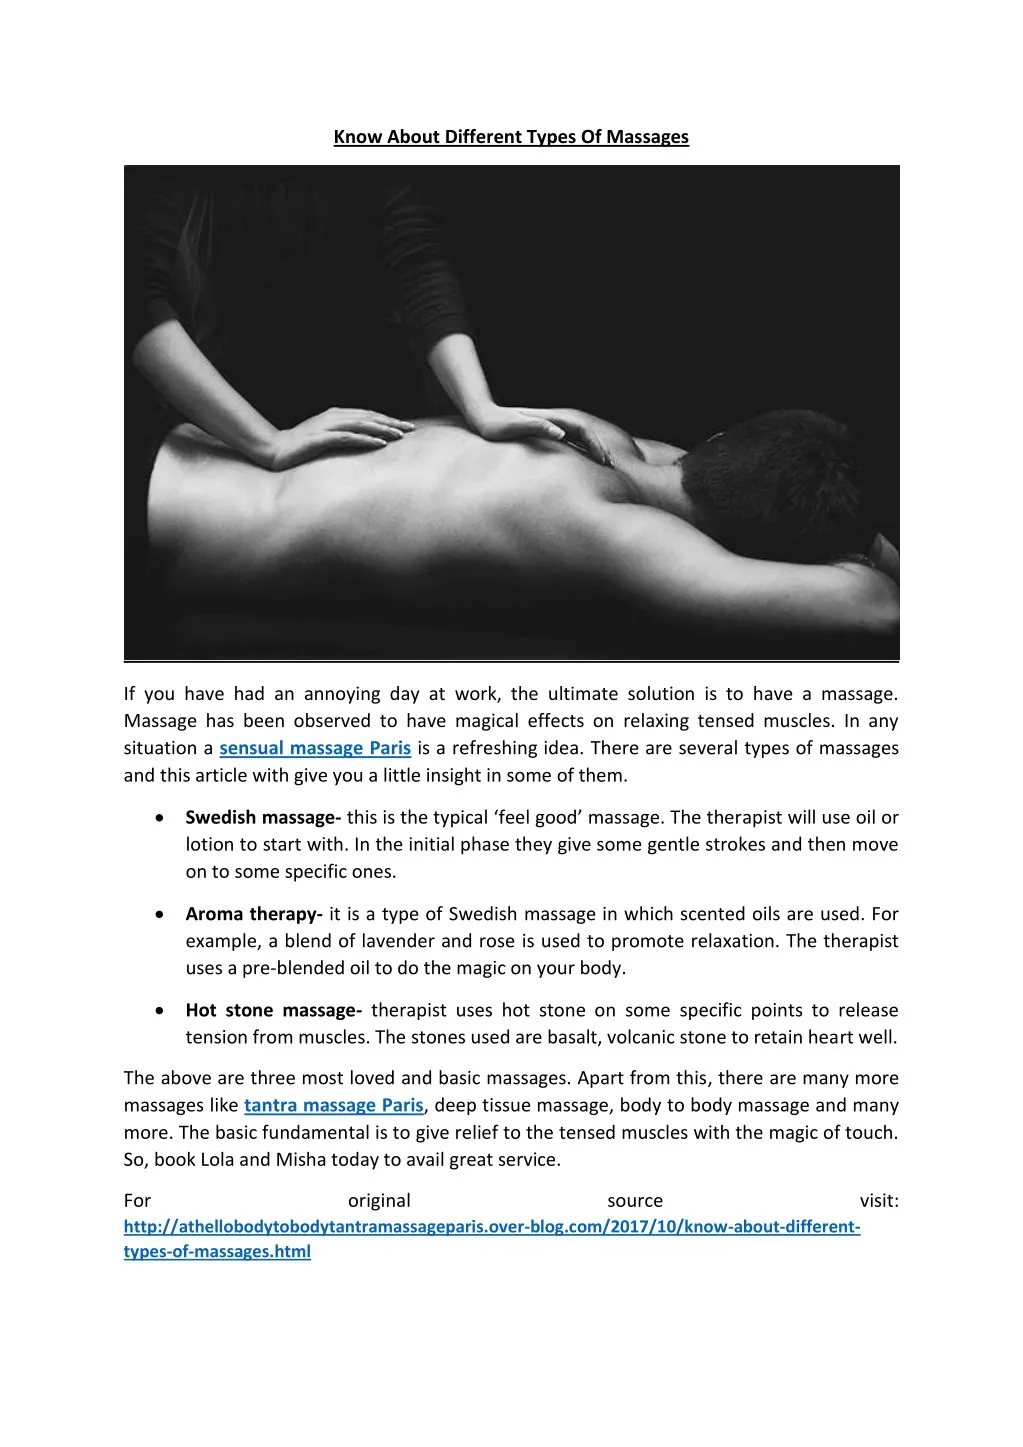 know about different types of massages